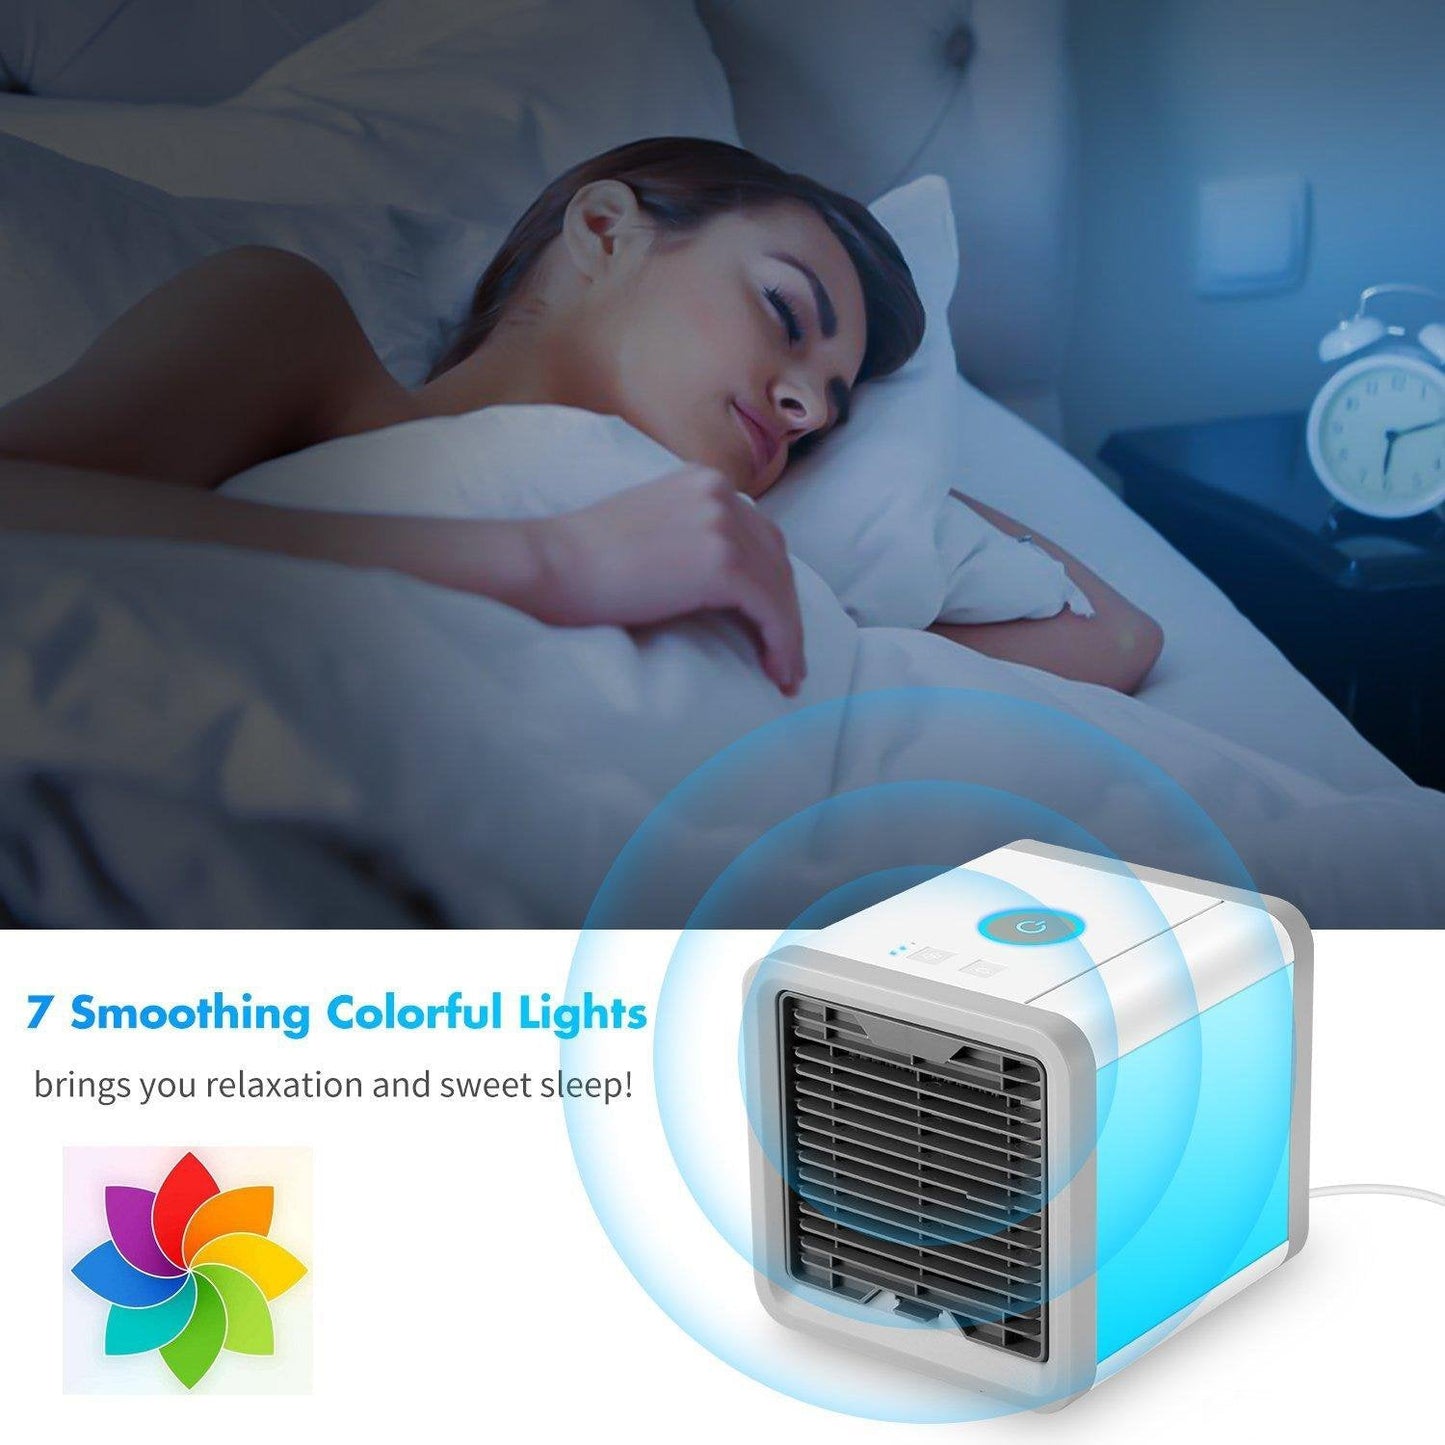 COMLIFE 3 in 1 Personal Space Air Cooler, Humidifier and Purifier, Desktop Air Conditioner Fan with 3 Speeds and 7 Colors LED Night Light